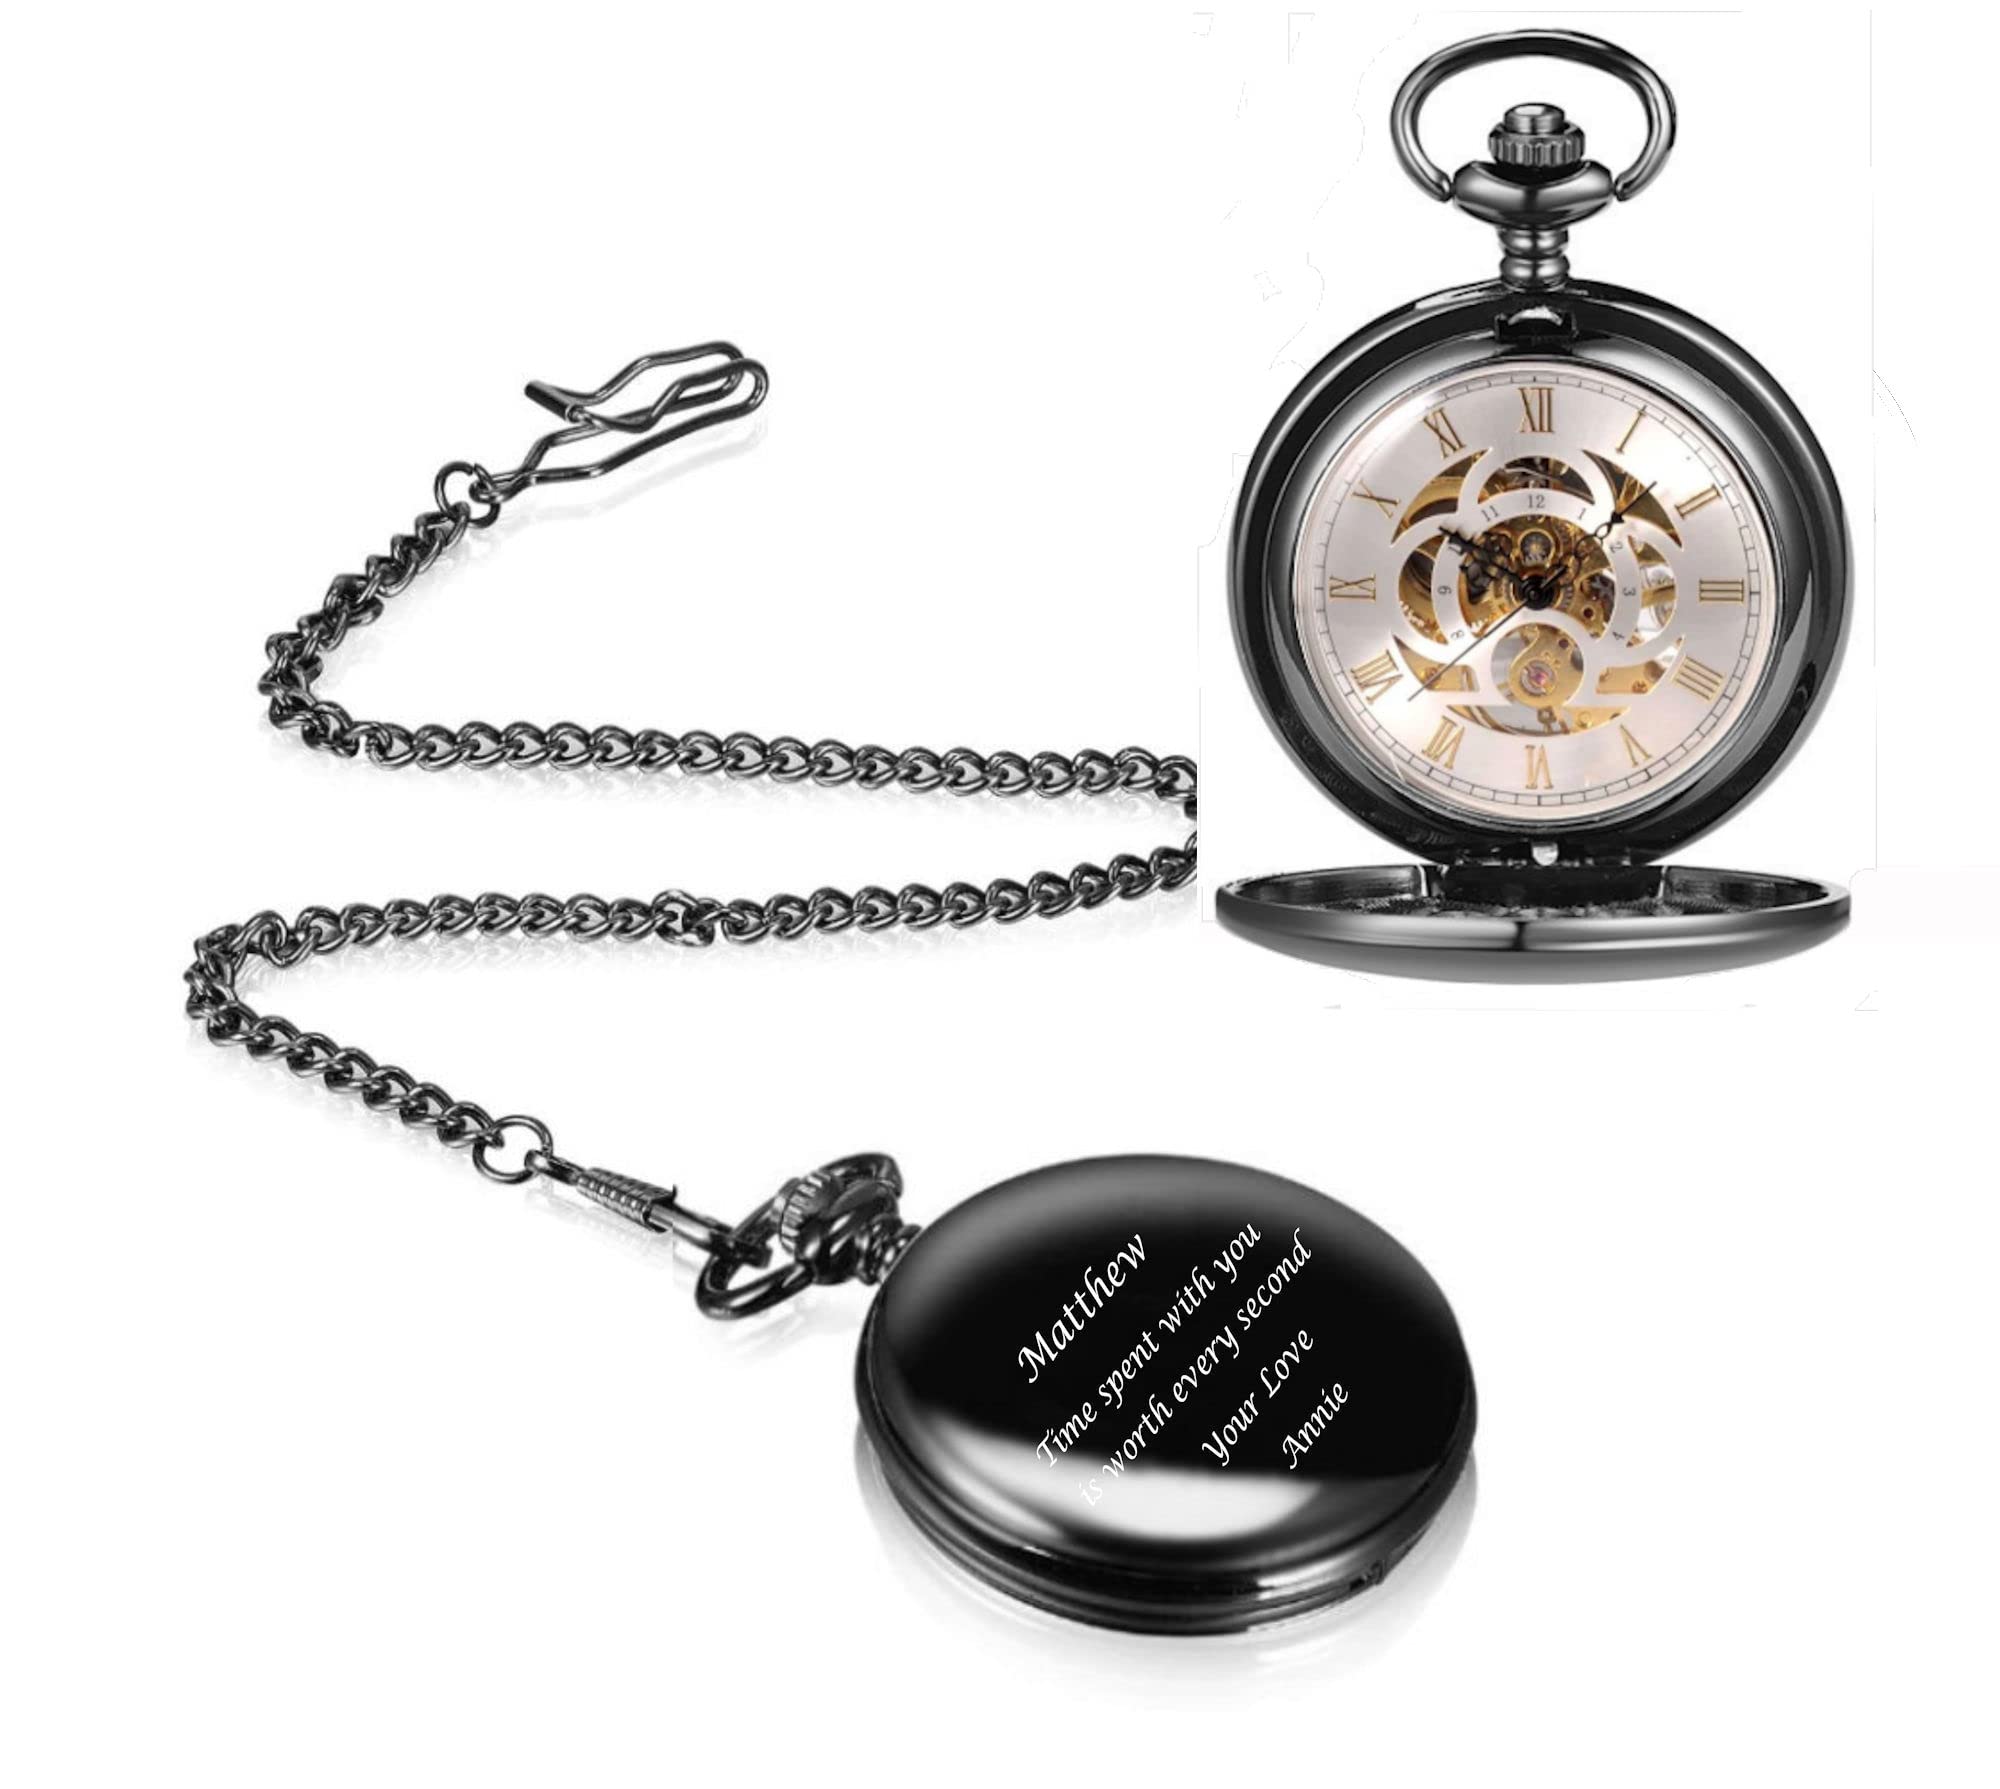 Personalized Antique Mechanical Movement Gunmetal Pocket Watch Custom Engraved Free with Gift Box - Ships from USA, PW51